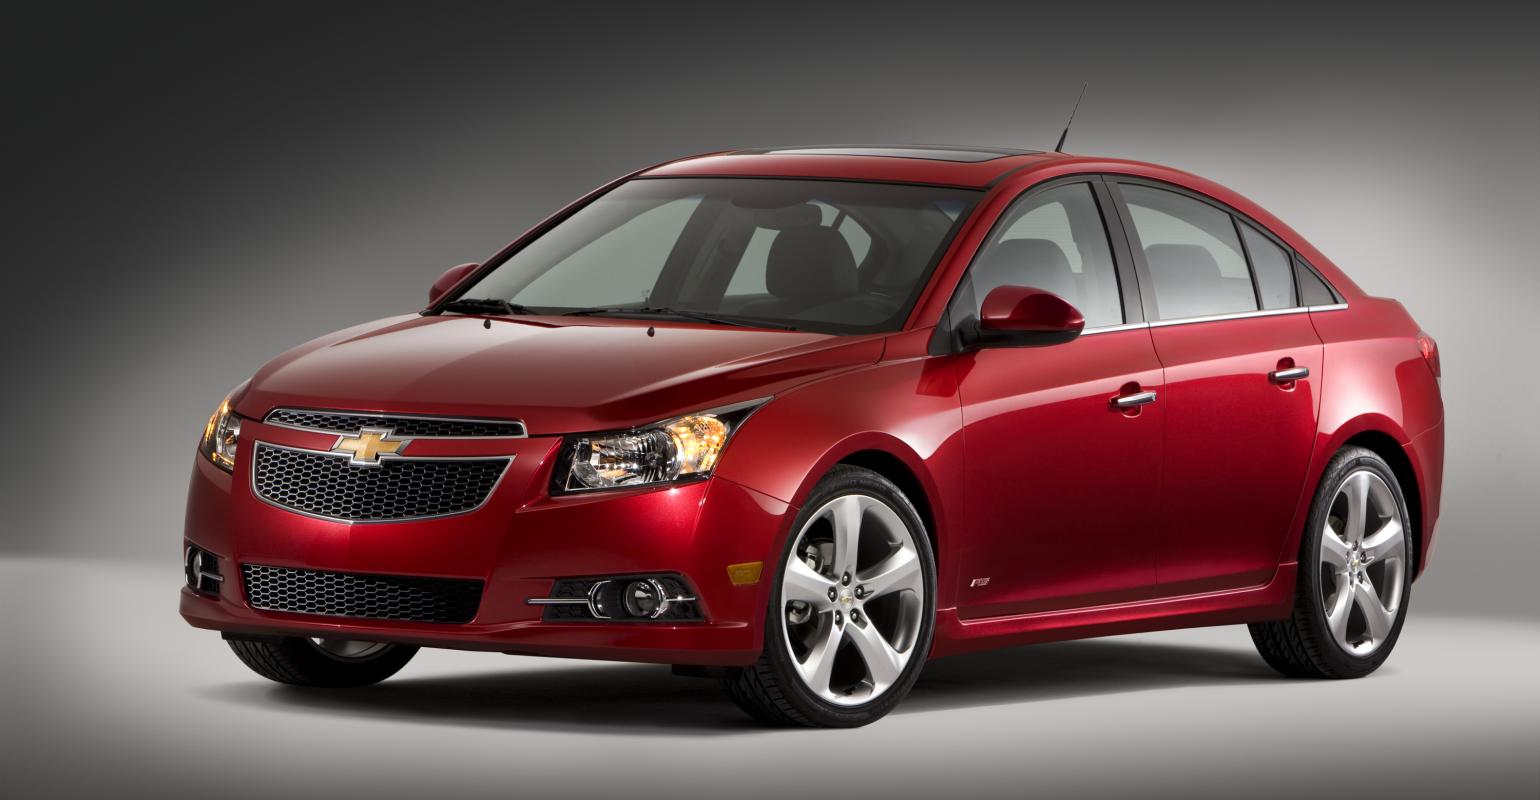 Chevy Cruze Could Dictate Direction of Compact-Car Segment in 2012 |  WardsAuto